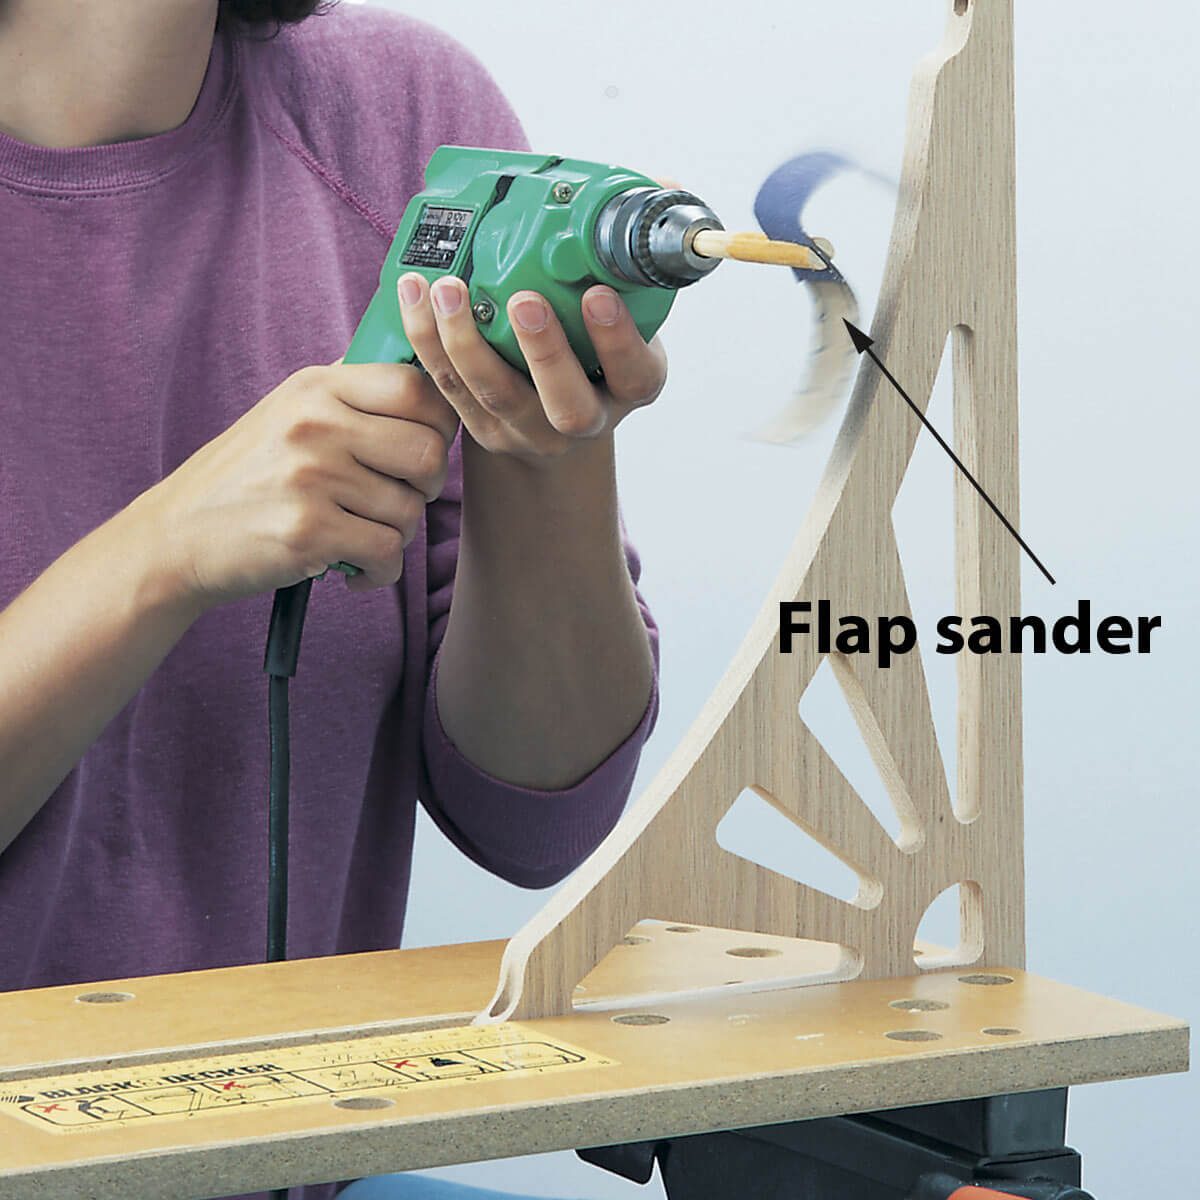 How to Make a Flap Sander